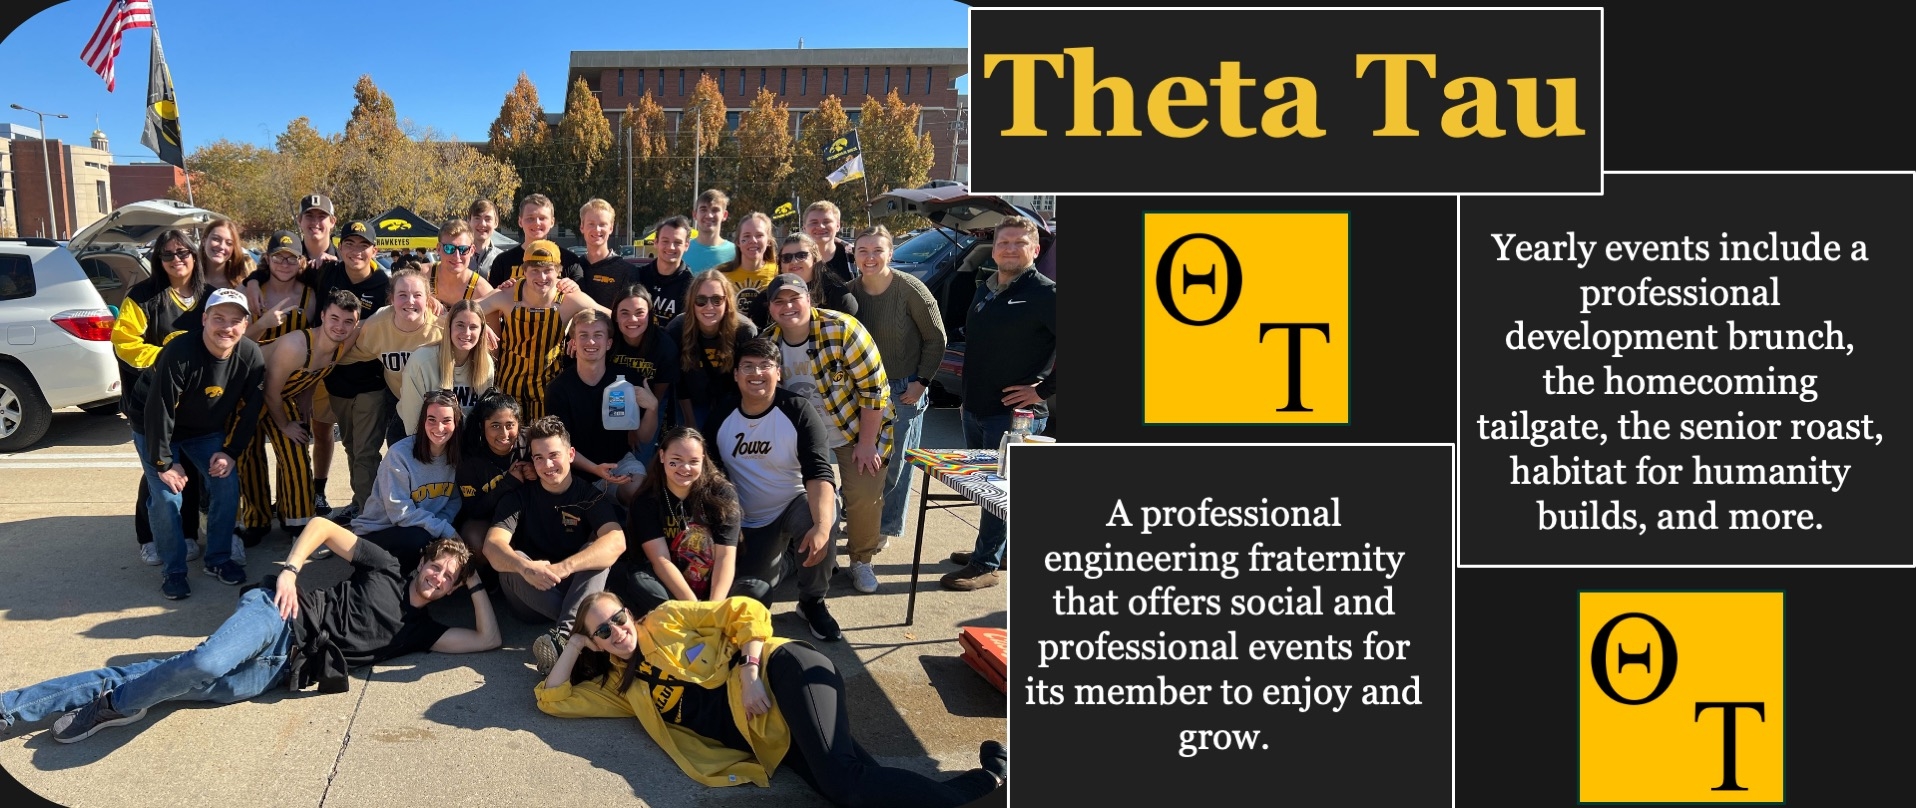 Theta Tau Professional Engineering Fraternity; A professional engineering fraternity that offers social and professional events for its member to enjoy and grow.  Yearly events include a professional development brunch, the homecoming tailgate, the senior roast, habitat for humanity builds, and more.